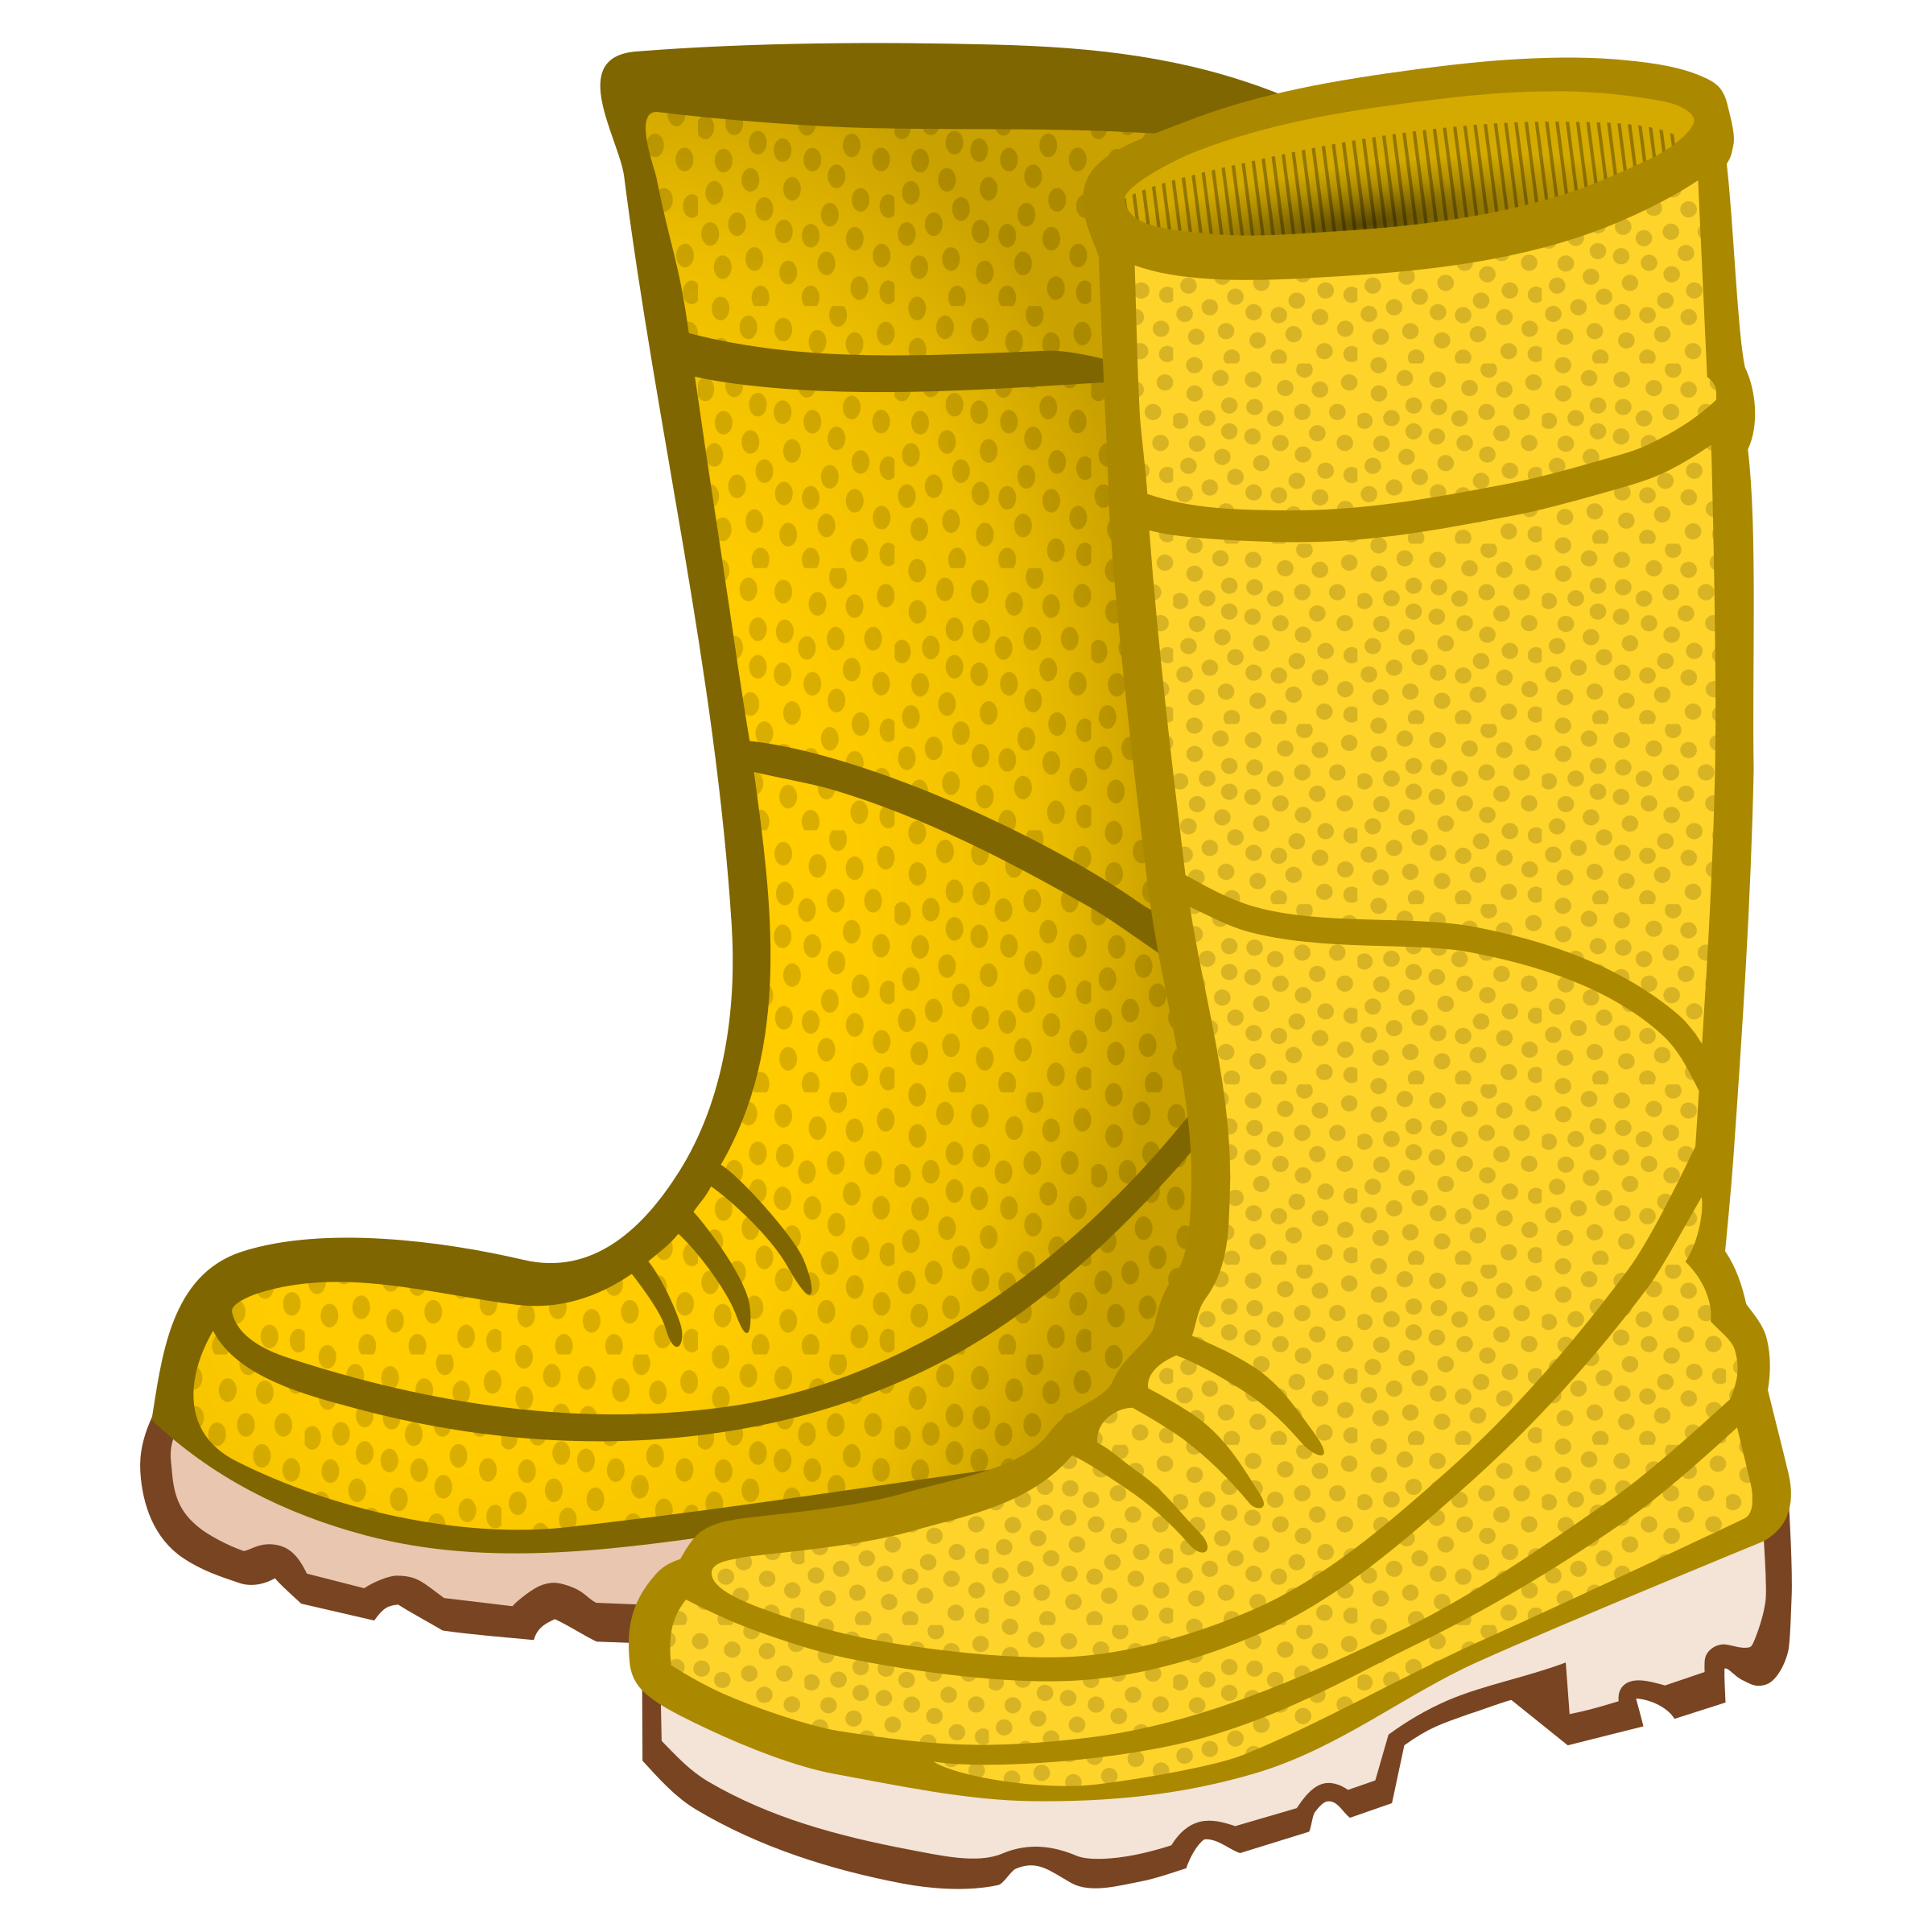 Rain boots cowboy boots clipart free download clip art on 4 clipartbarn -.....